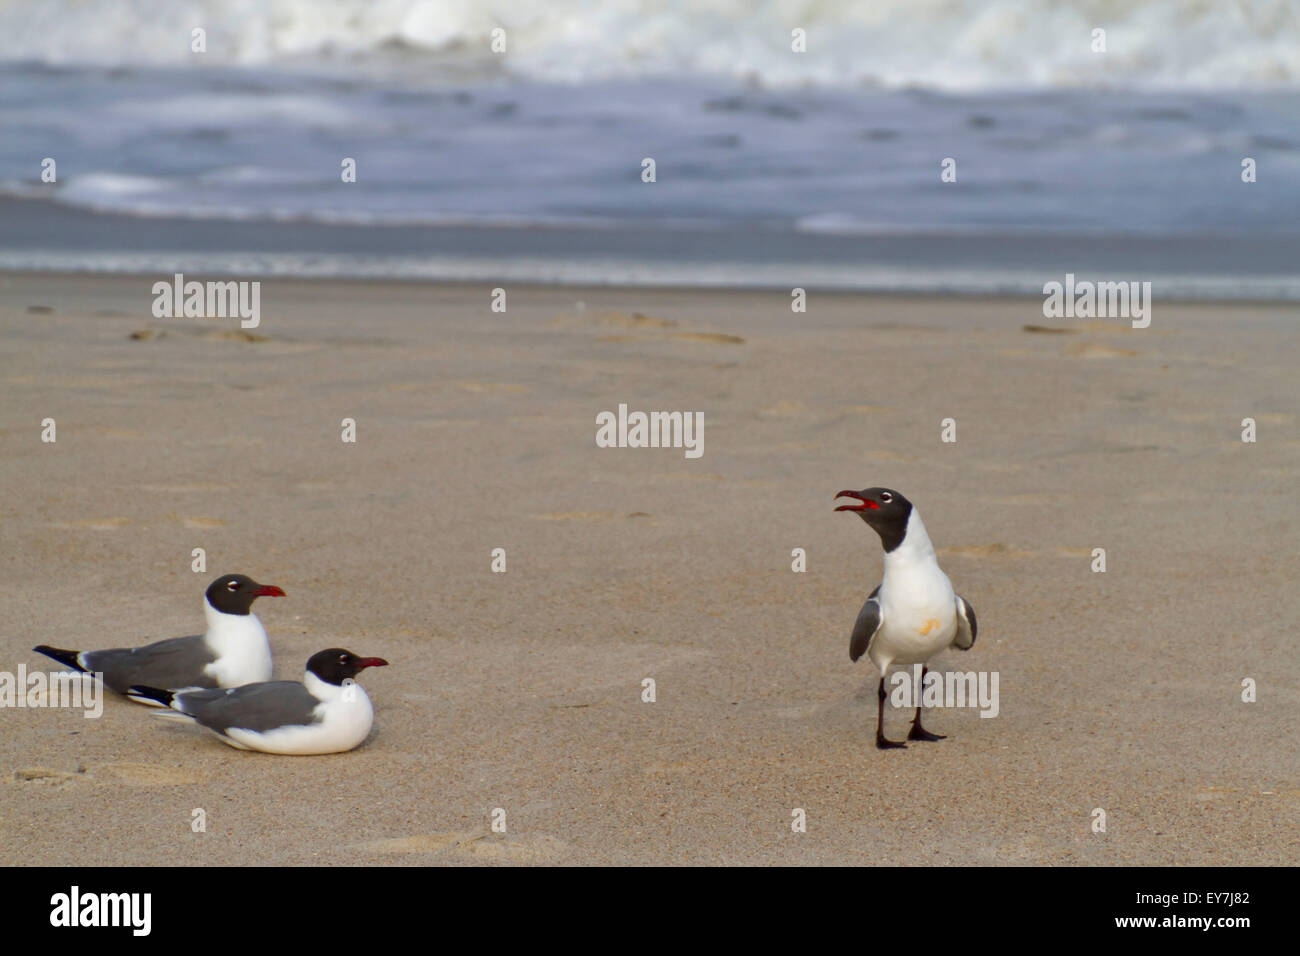 Two seagulls lie close together on the beach by the sea watching as a third seagull loudly vocalizes to them Stock Photo